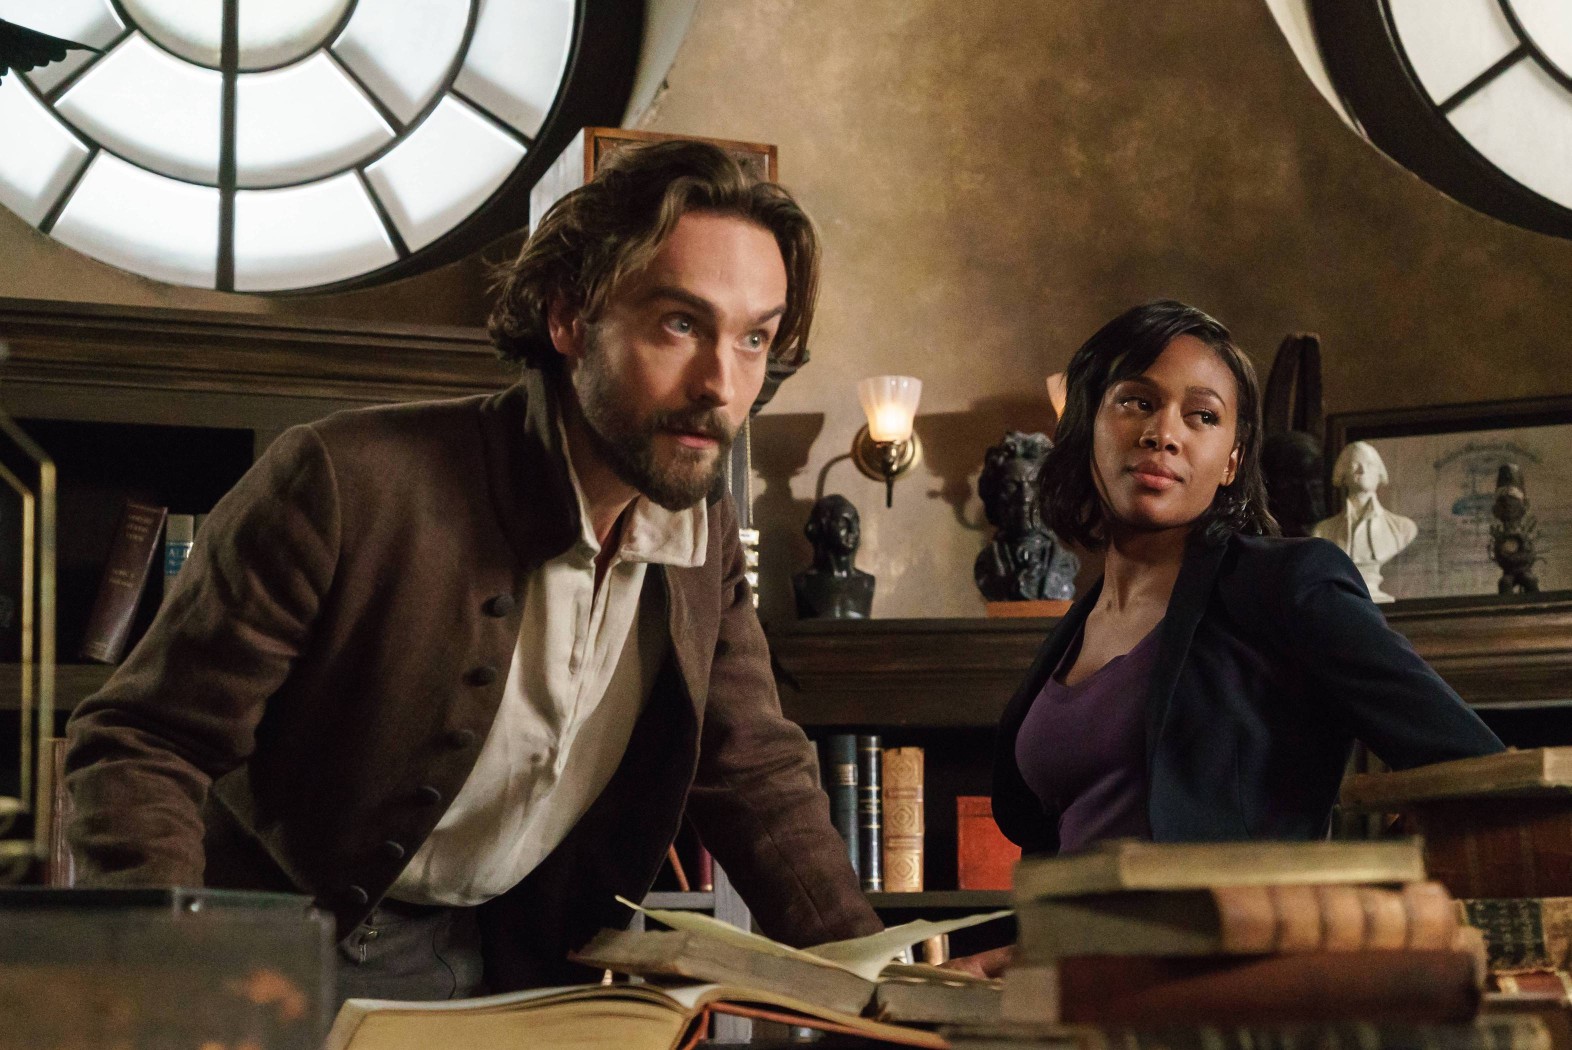 SLEEPY HOLLOW: L-R: Tom Mison and Nicole Beharie in the "The Sister Mills" episode of SLEEPY HOLLOW airing Thursday, Oct. 22 (9:00-10:00 PM ET/PT) on FOX. ©2015 Fox Broadcasting Co. CR: Tina Rowden/FOX